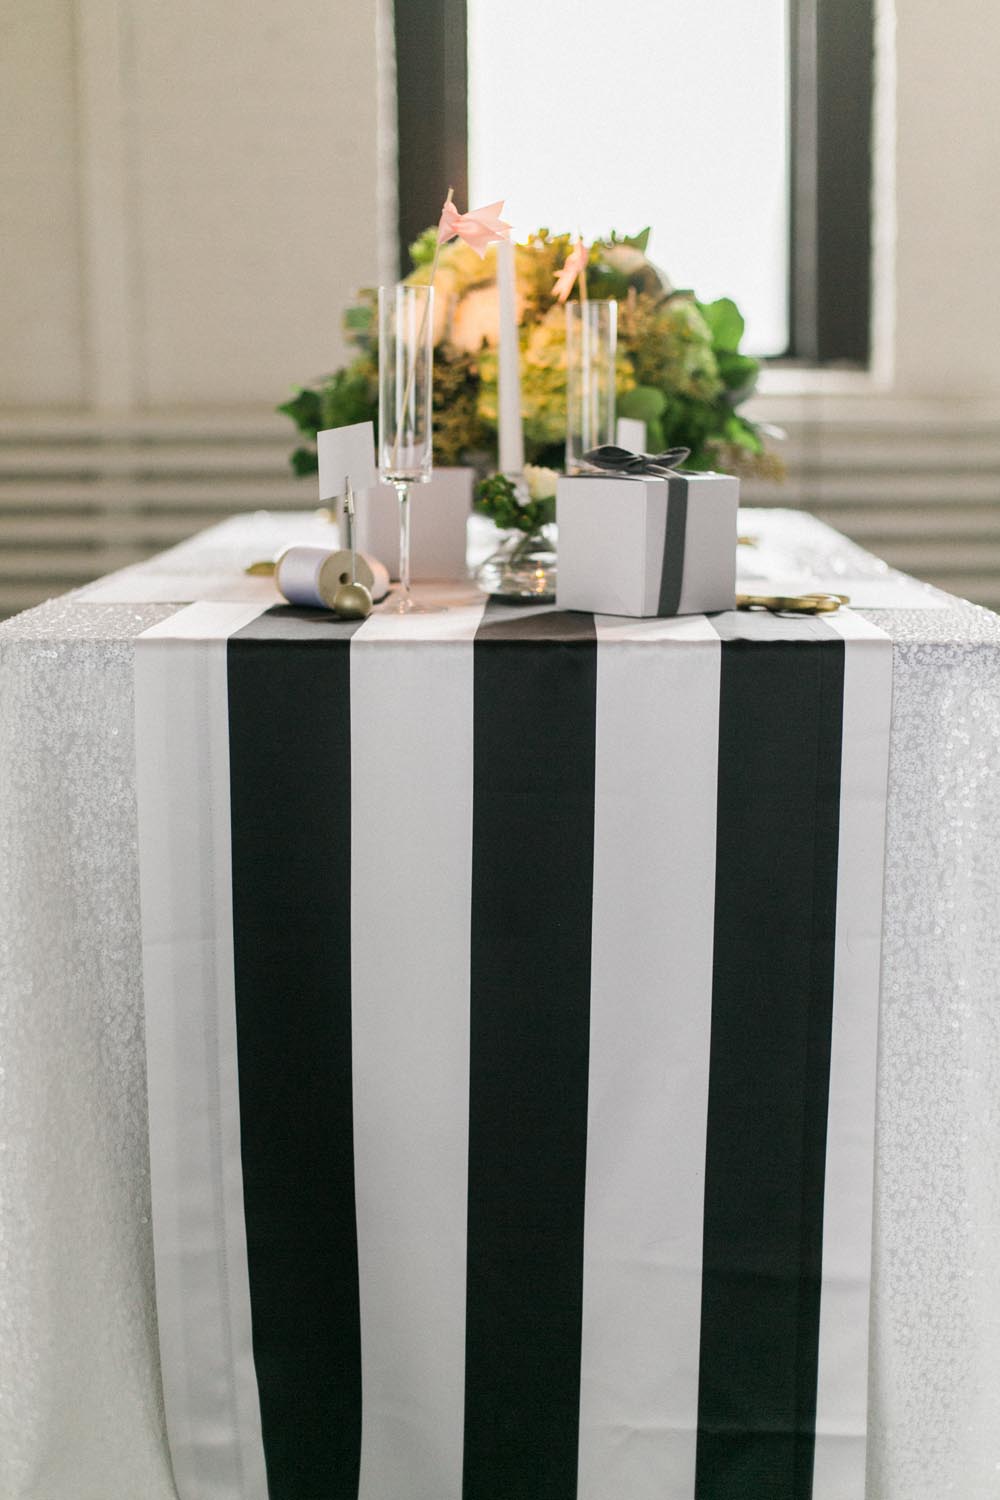 View More: http://laurelynsavannah.pass.us/mint-lovely-styled-shoots